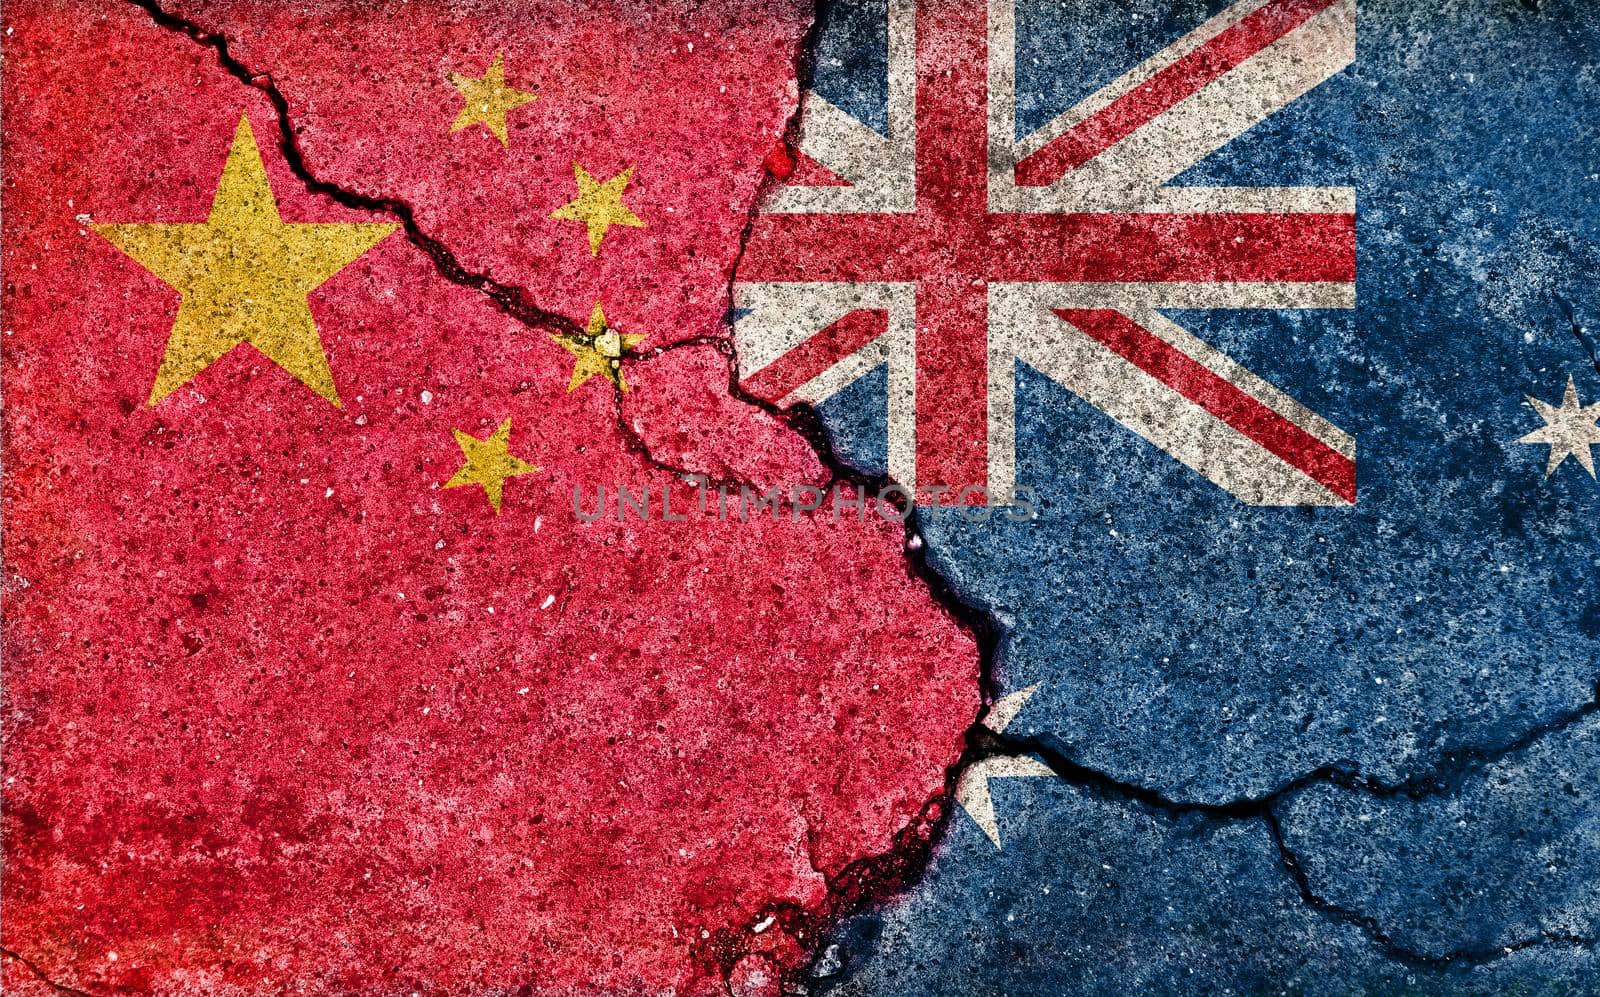 Grunge country flag illustration (cracked concrete background) / China vs Australia (Political or economic conflict) by barks